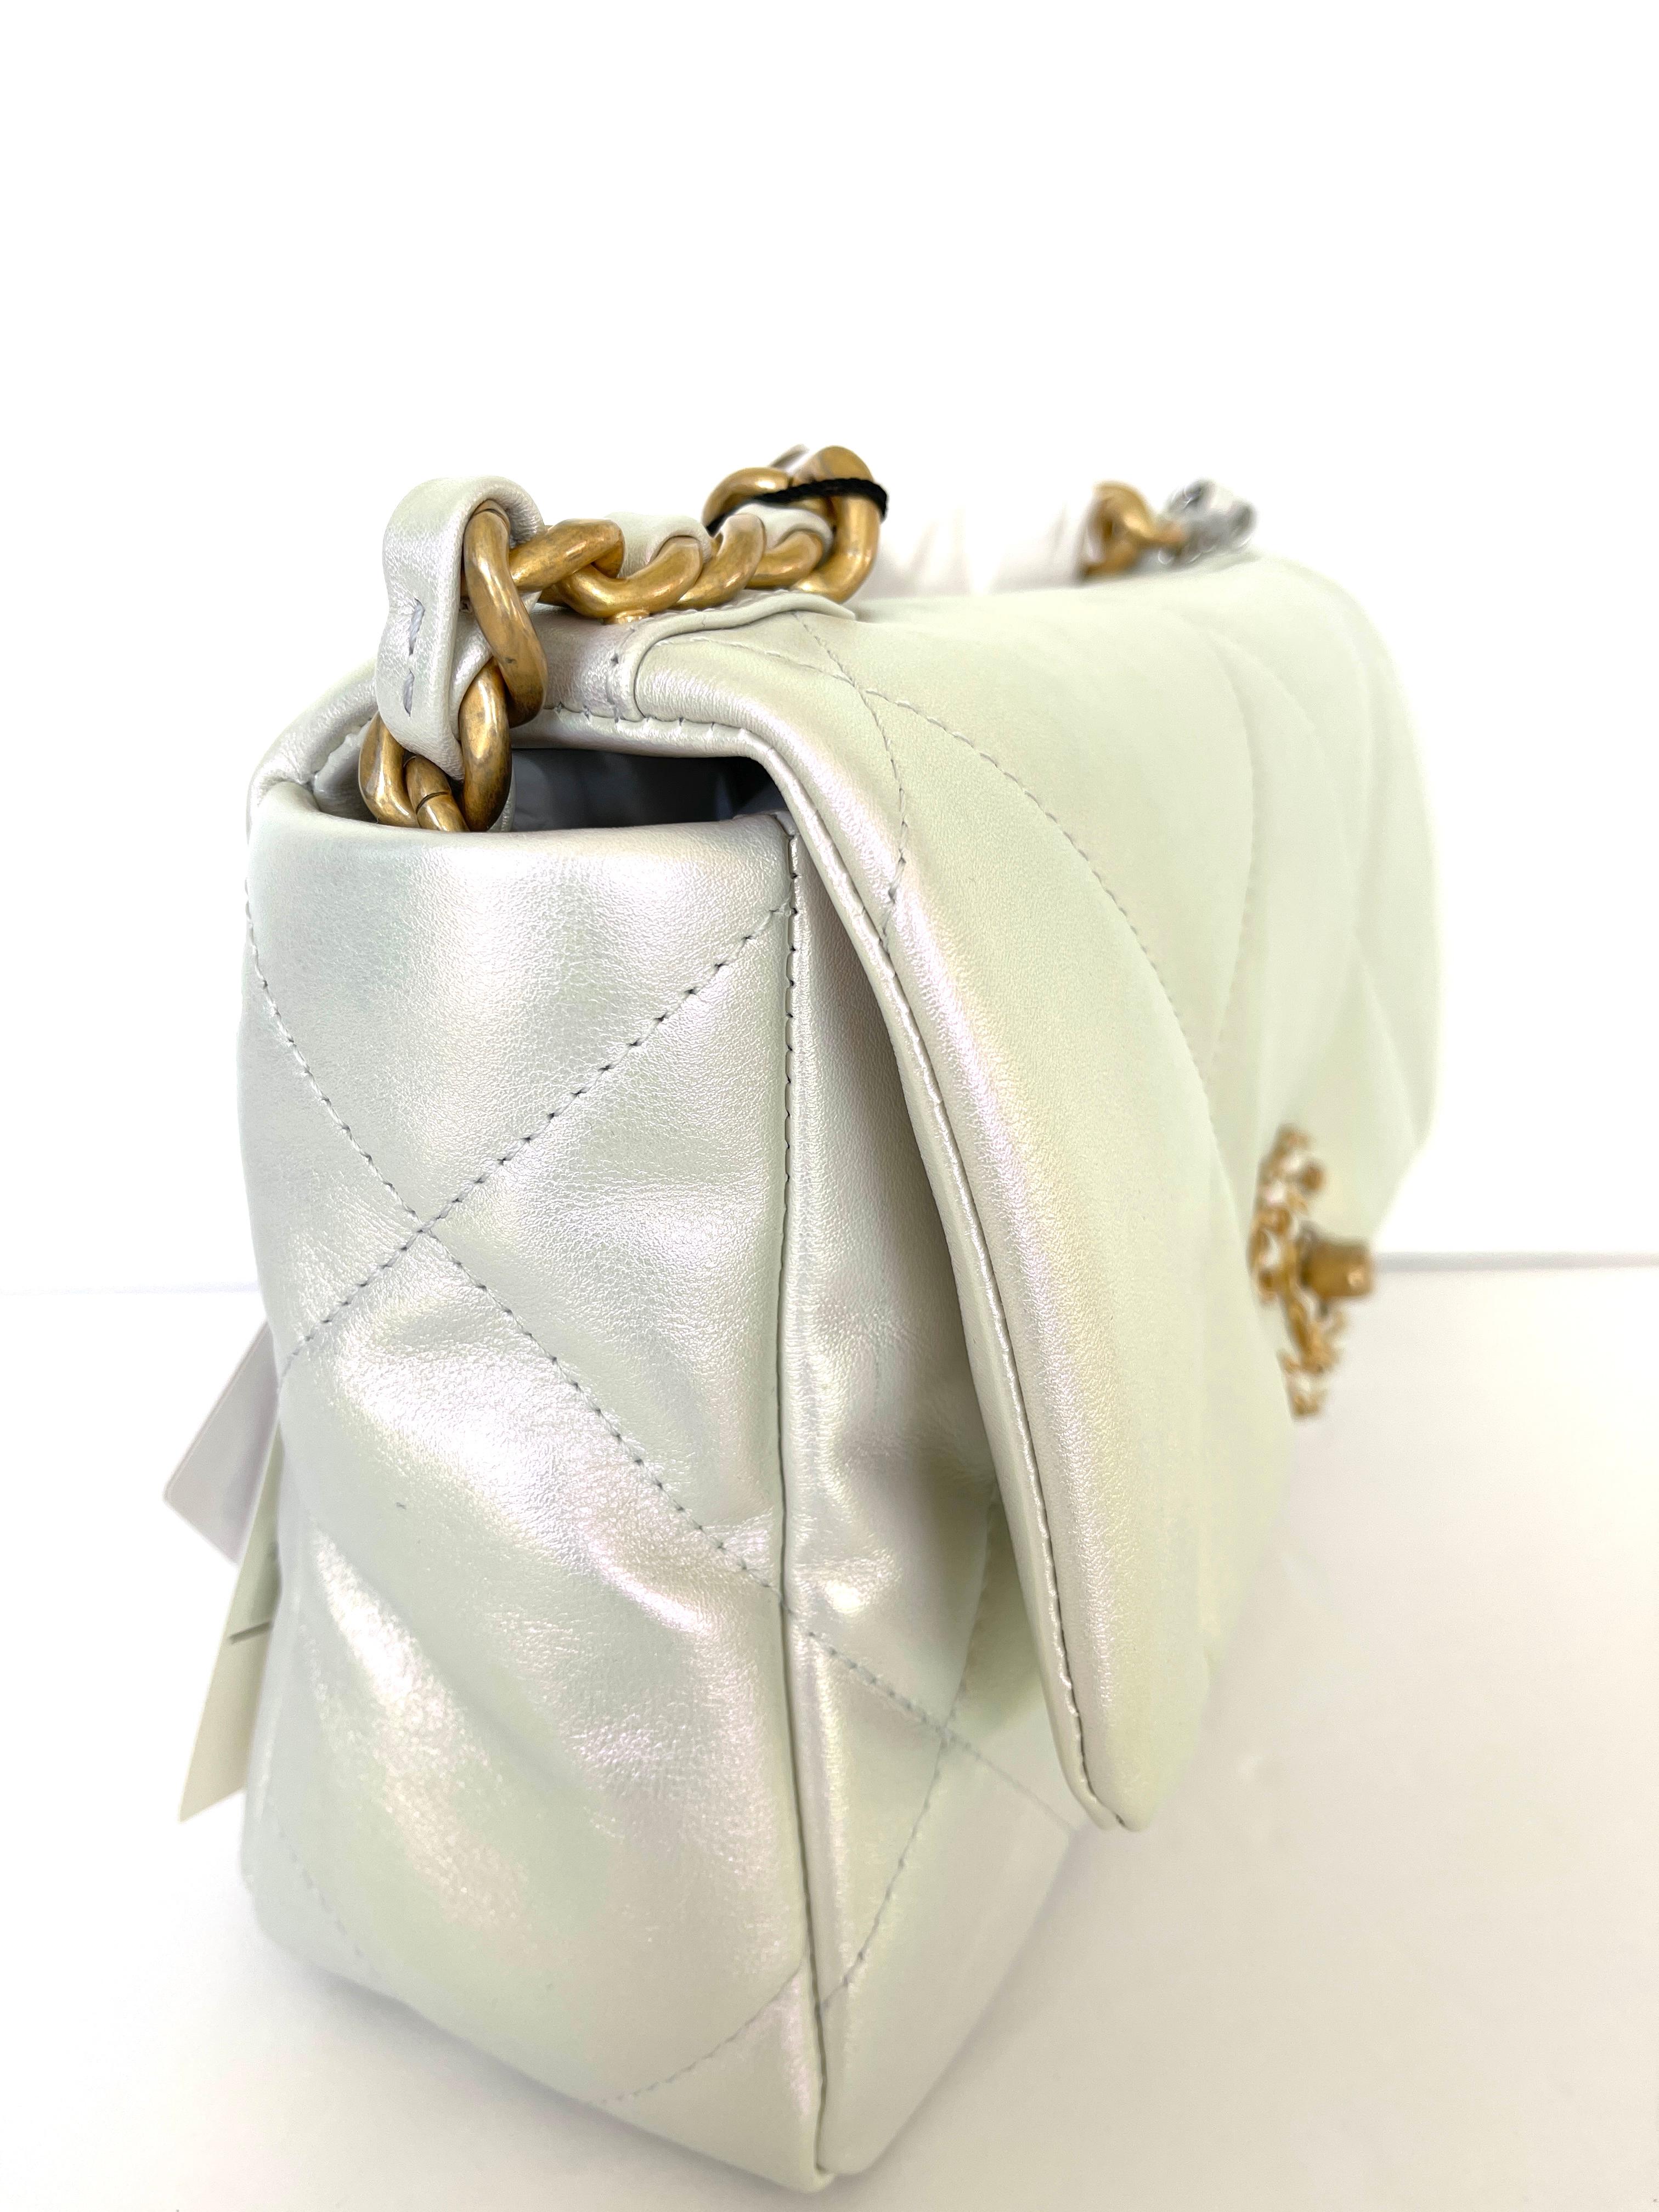 CHANEL Small 19 Flap Bag 21P Iridescent White Goatskin NEW Gold Silver 1